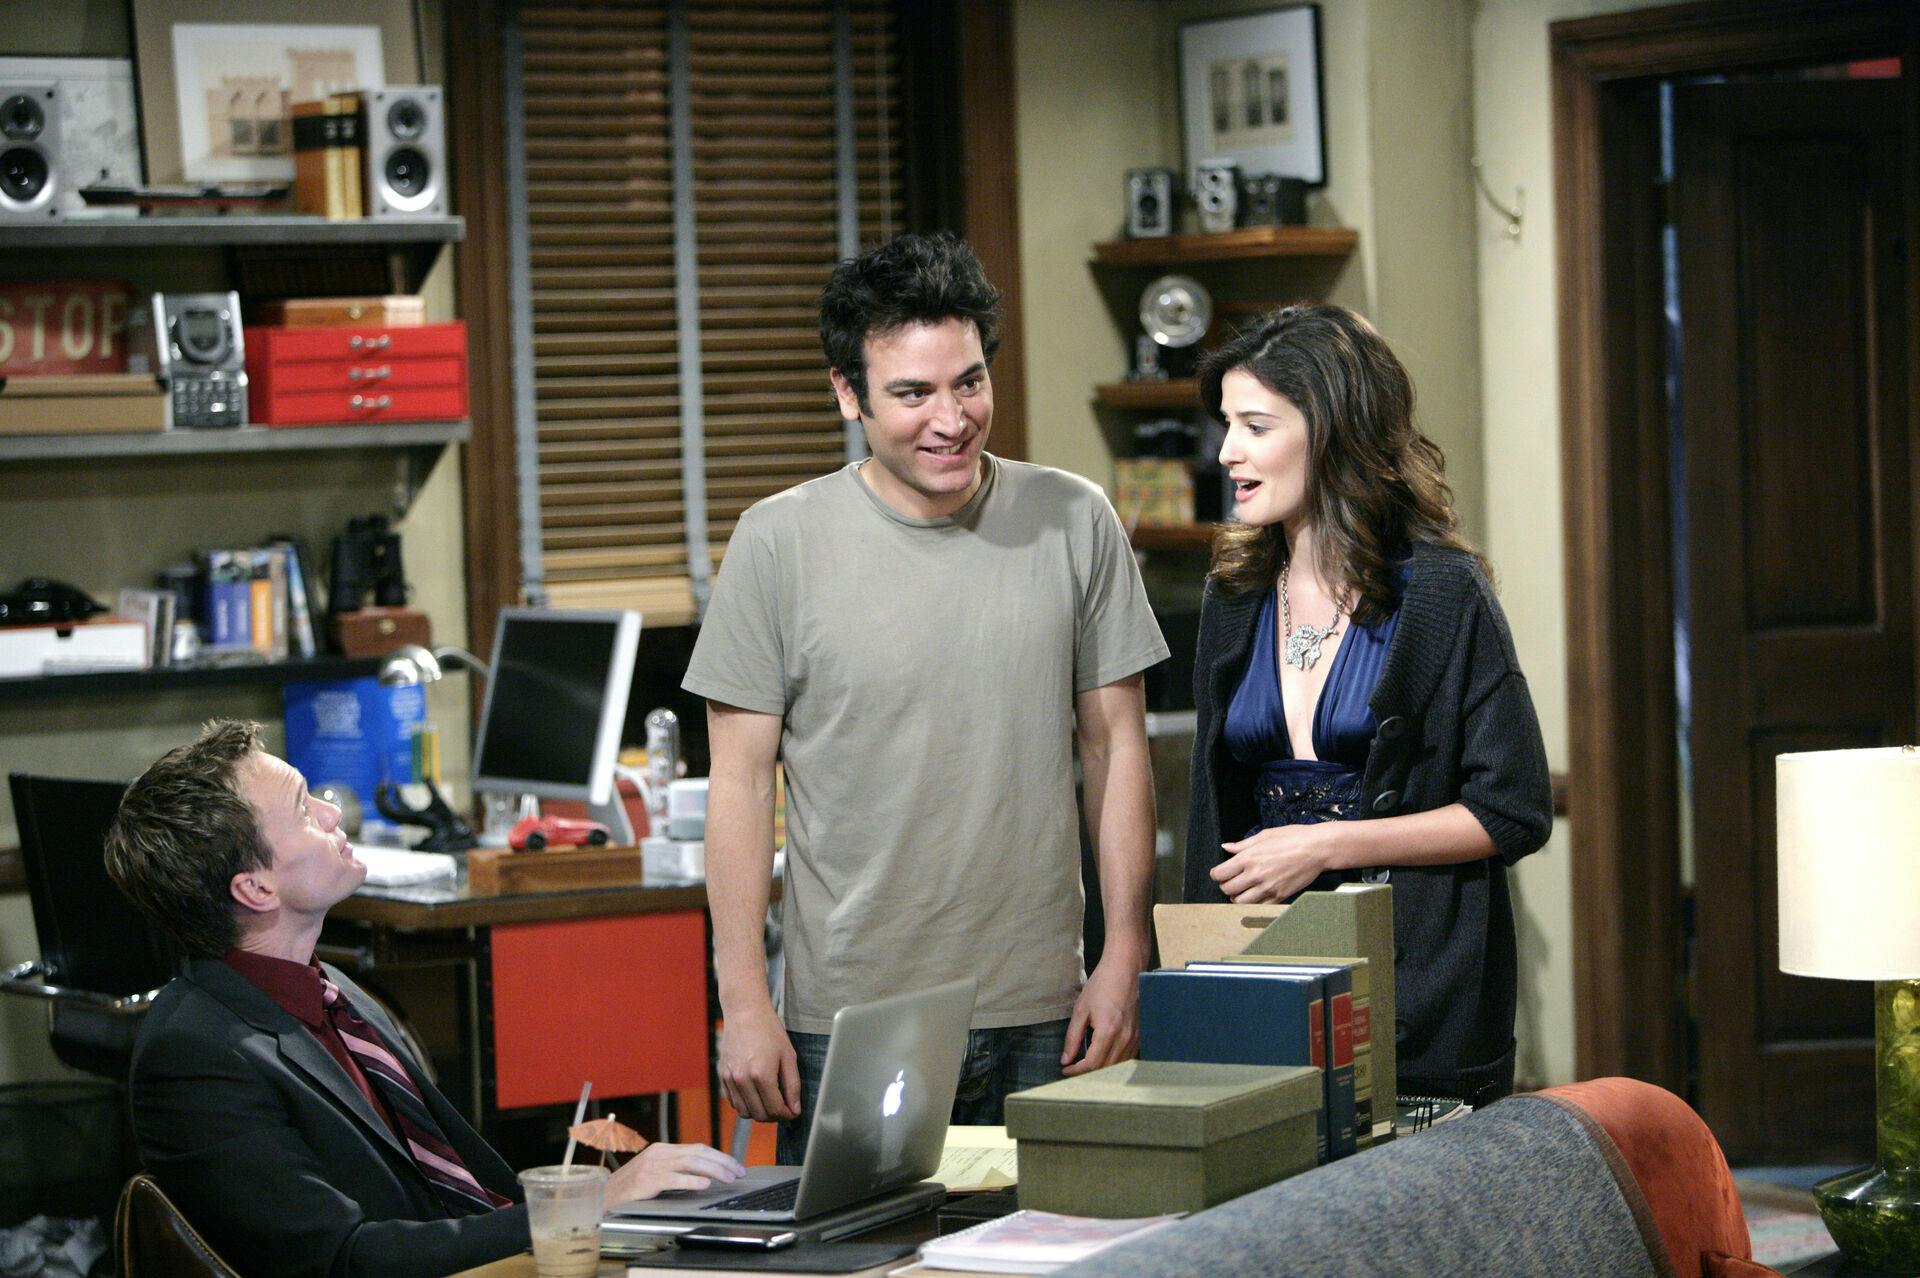 Cast members Josh Radnor, center, Neil Patrick Harris, left, and Cobie Smulders are seen while taping an episode of "How I Met Your Mother" in Los Angeles on Thursday, April 3, 2008. (AP Photo/Matt Sayles)